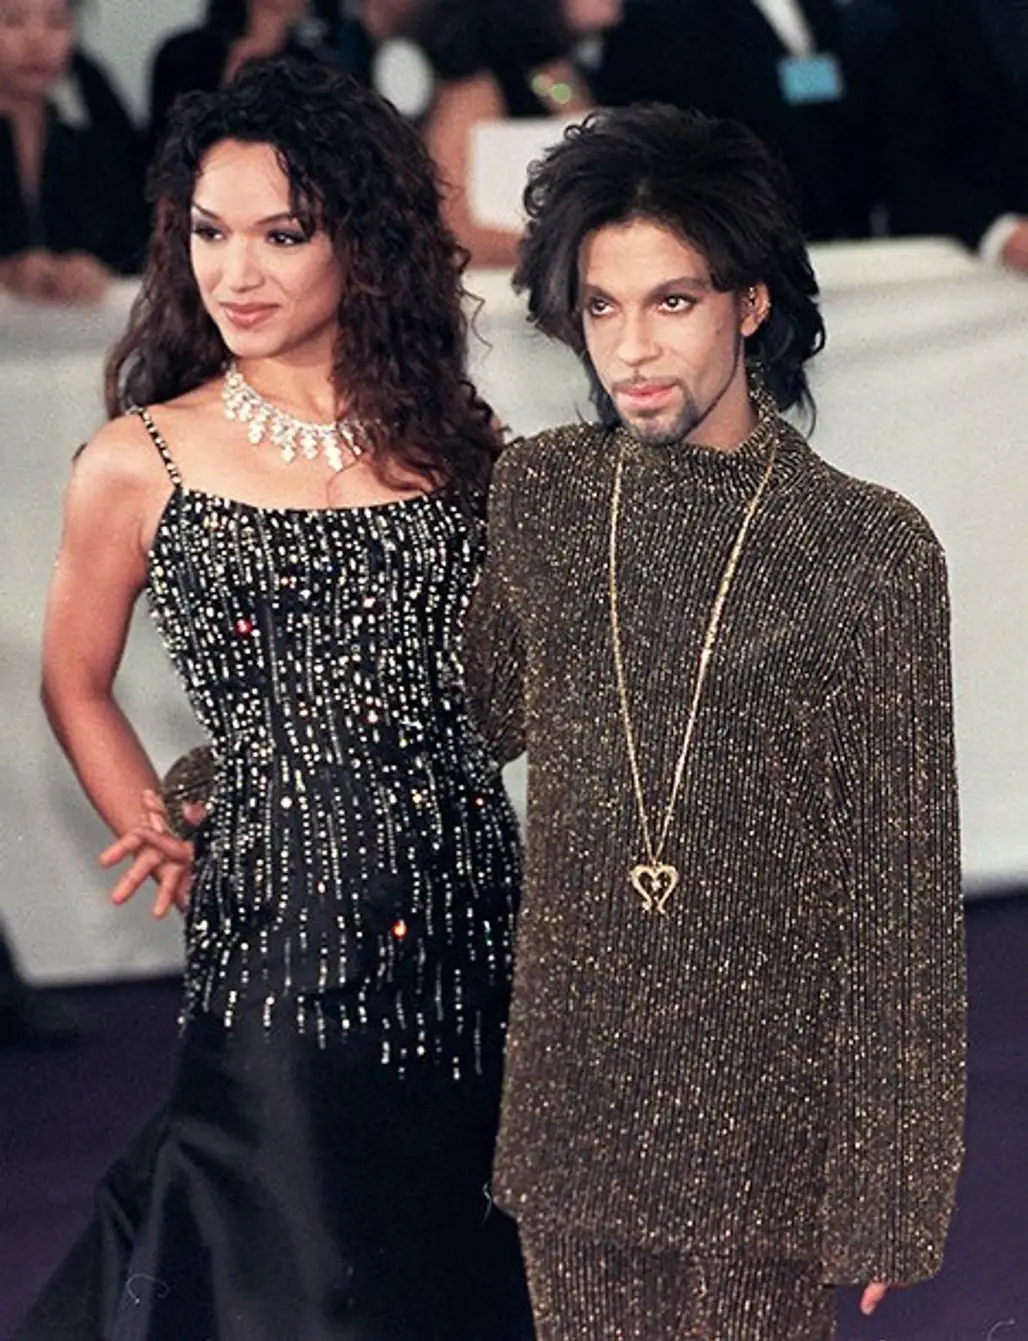 With Wife Mayte Garcia in a Glittery Sweater